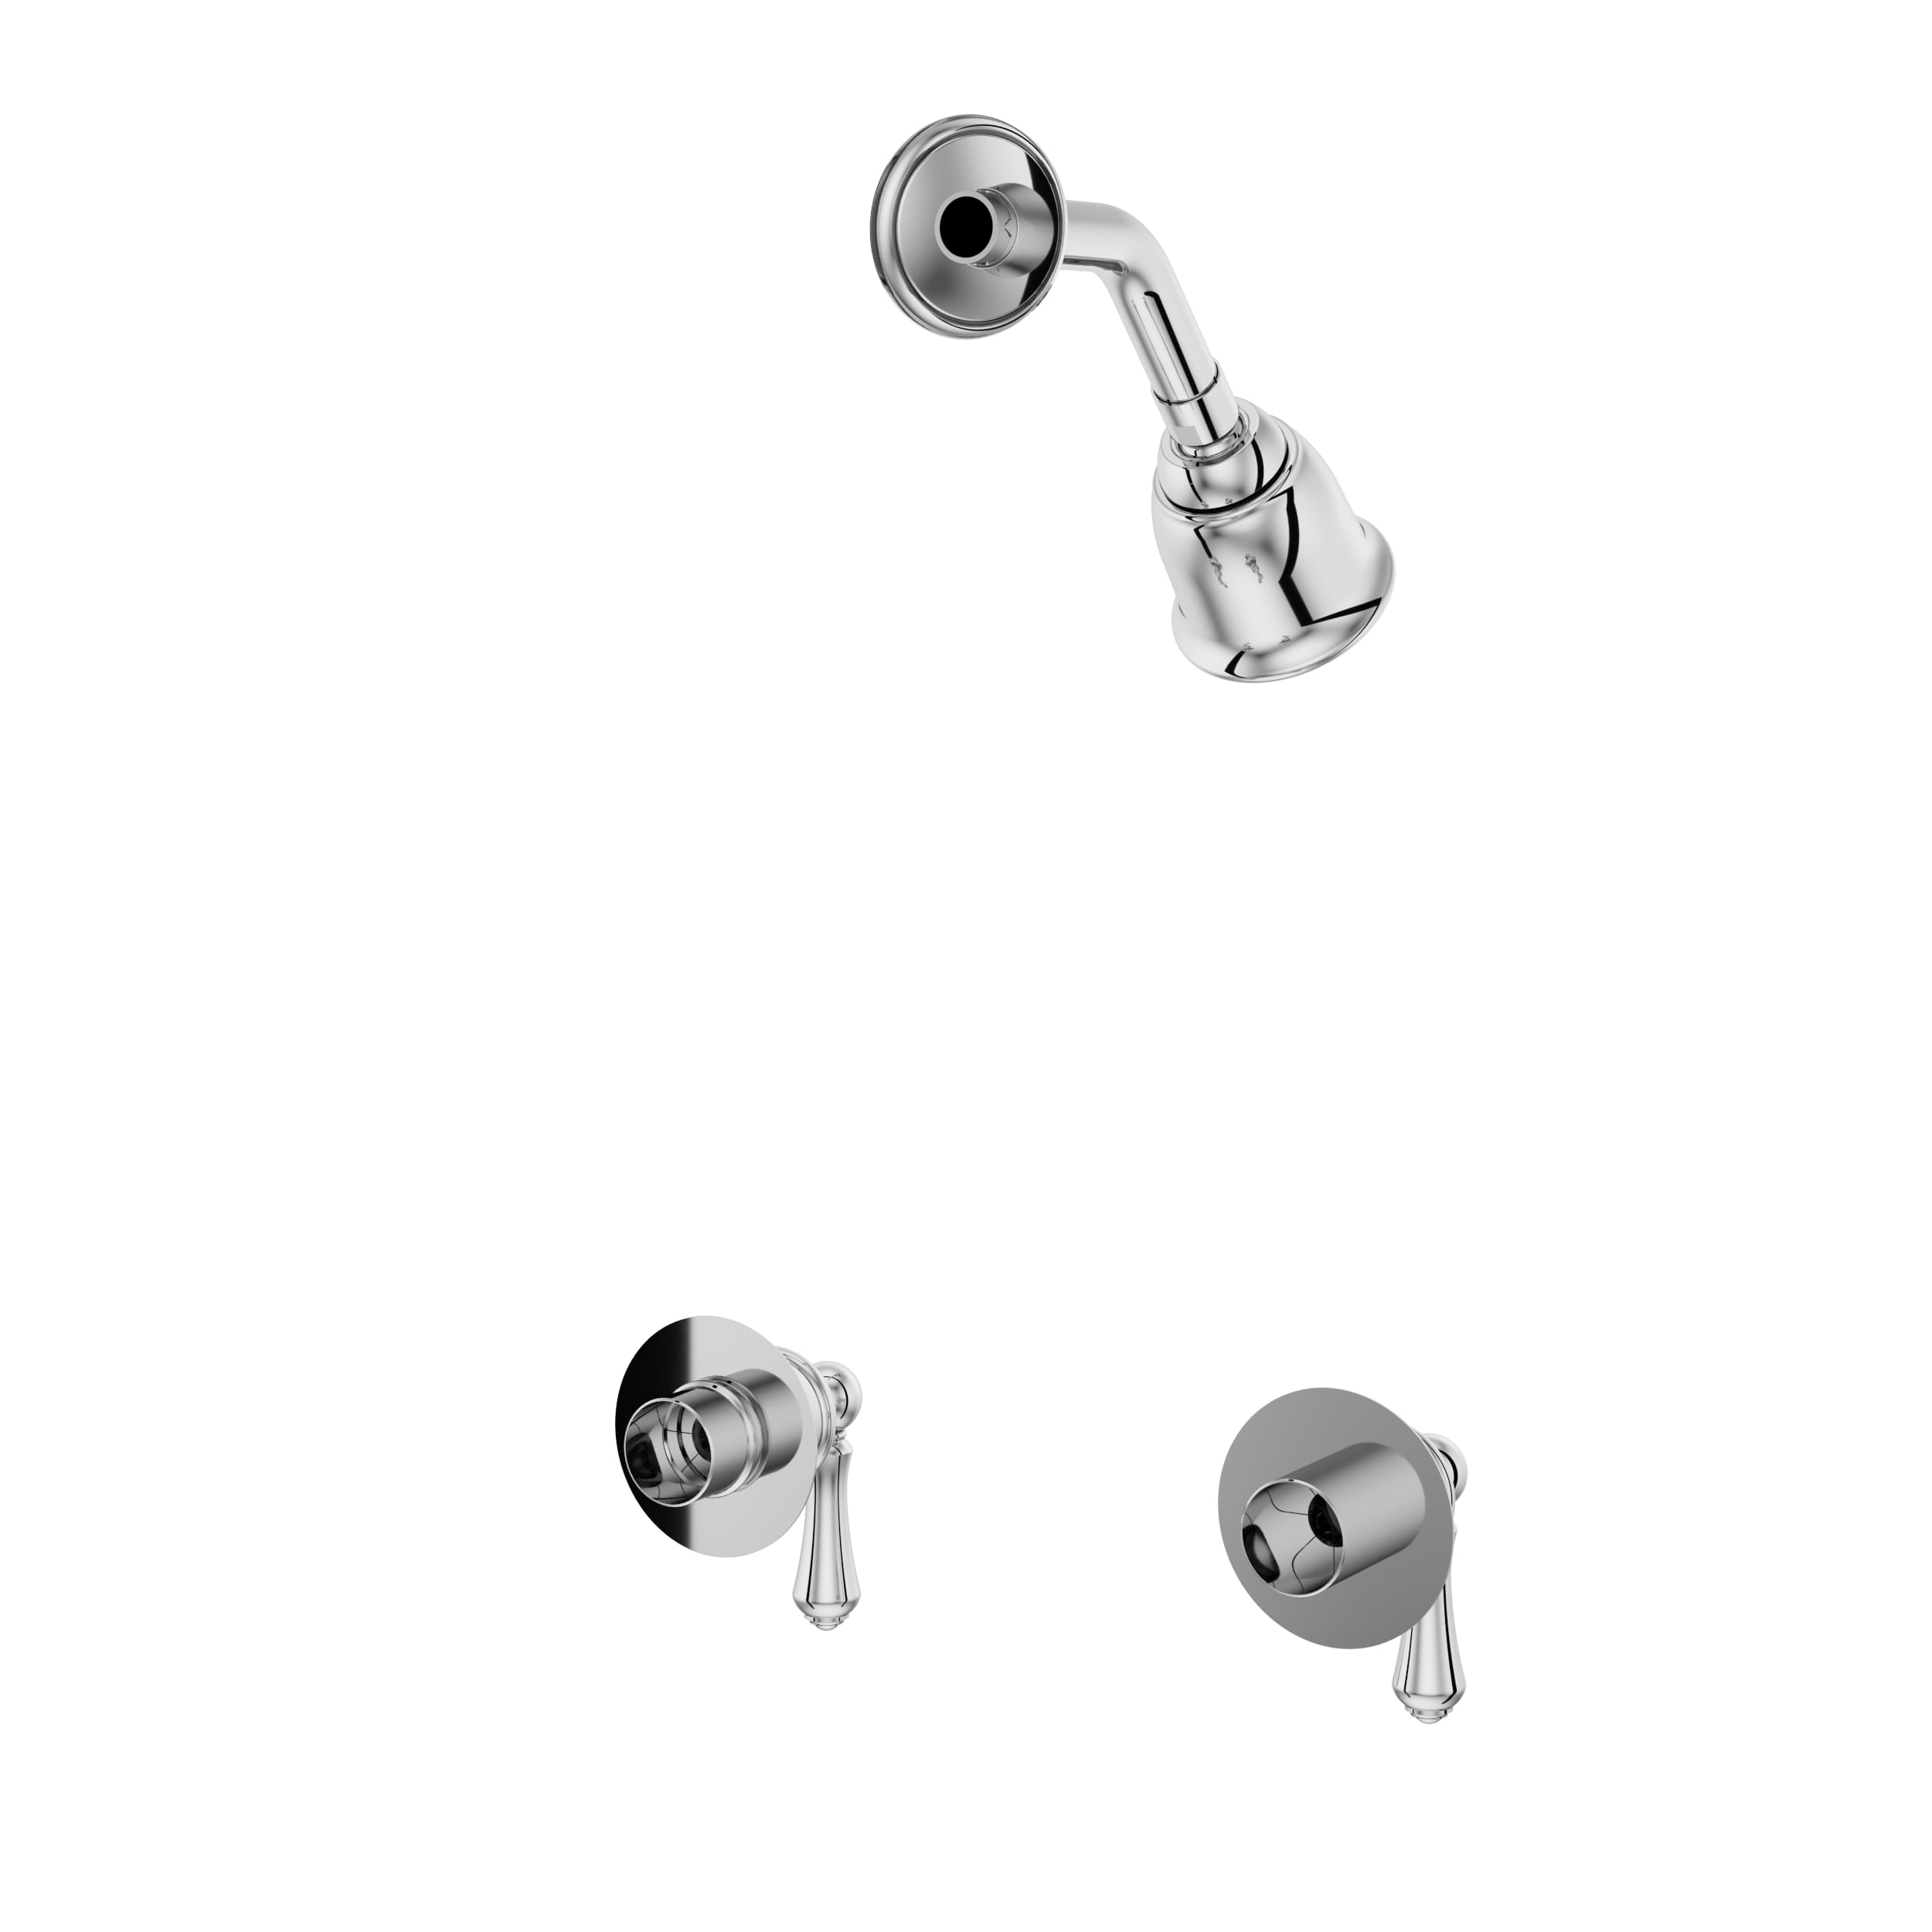 Pfister 07 Series Chrome 2-handle Bathtub and Shower Faucet in the 